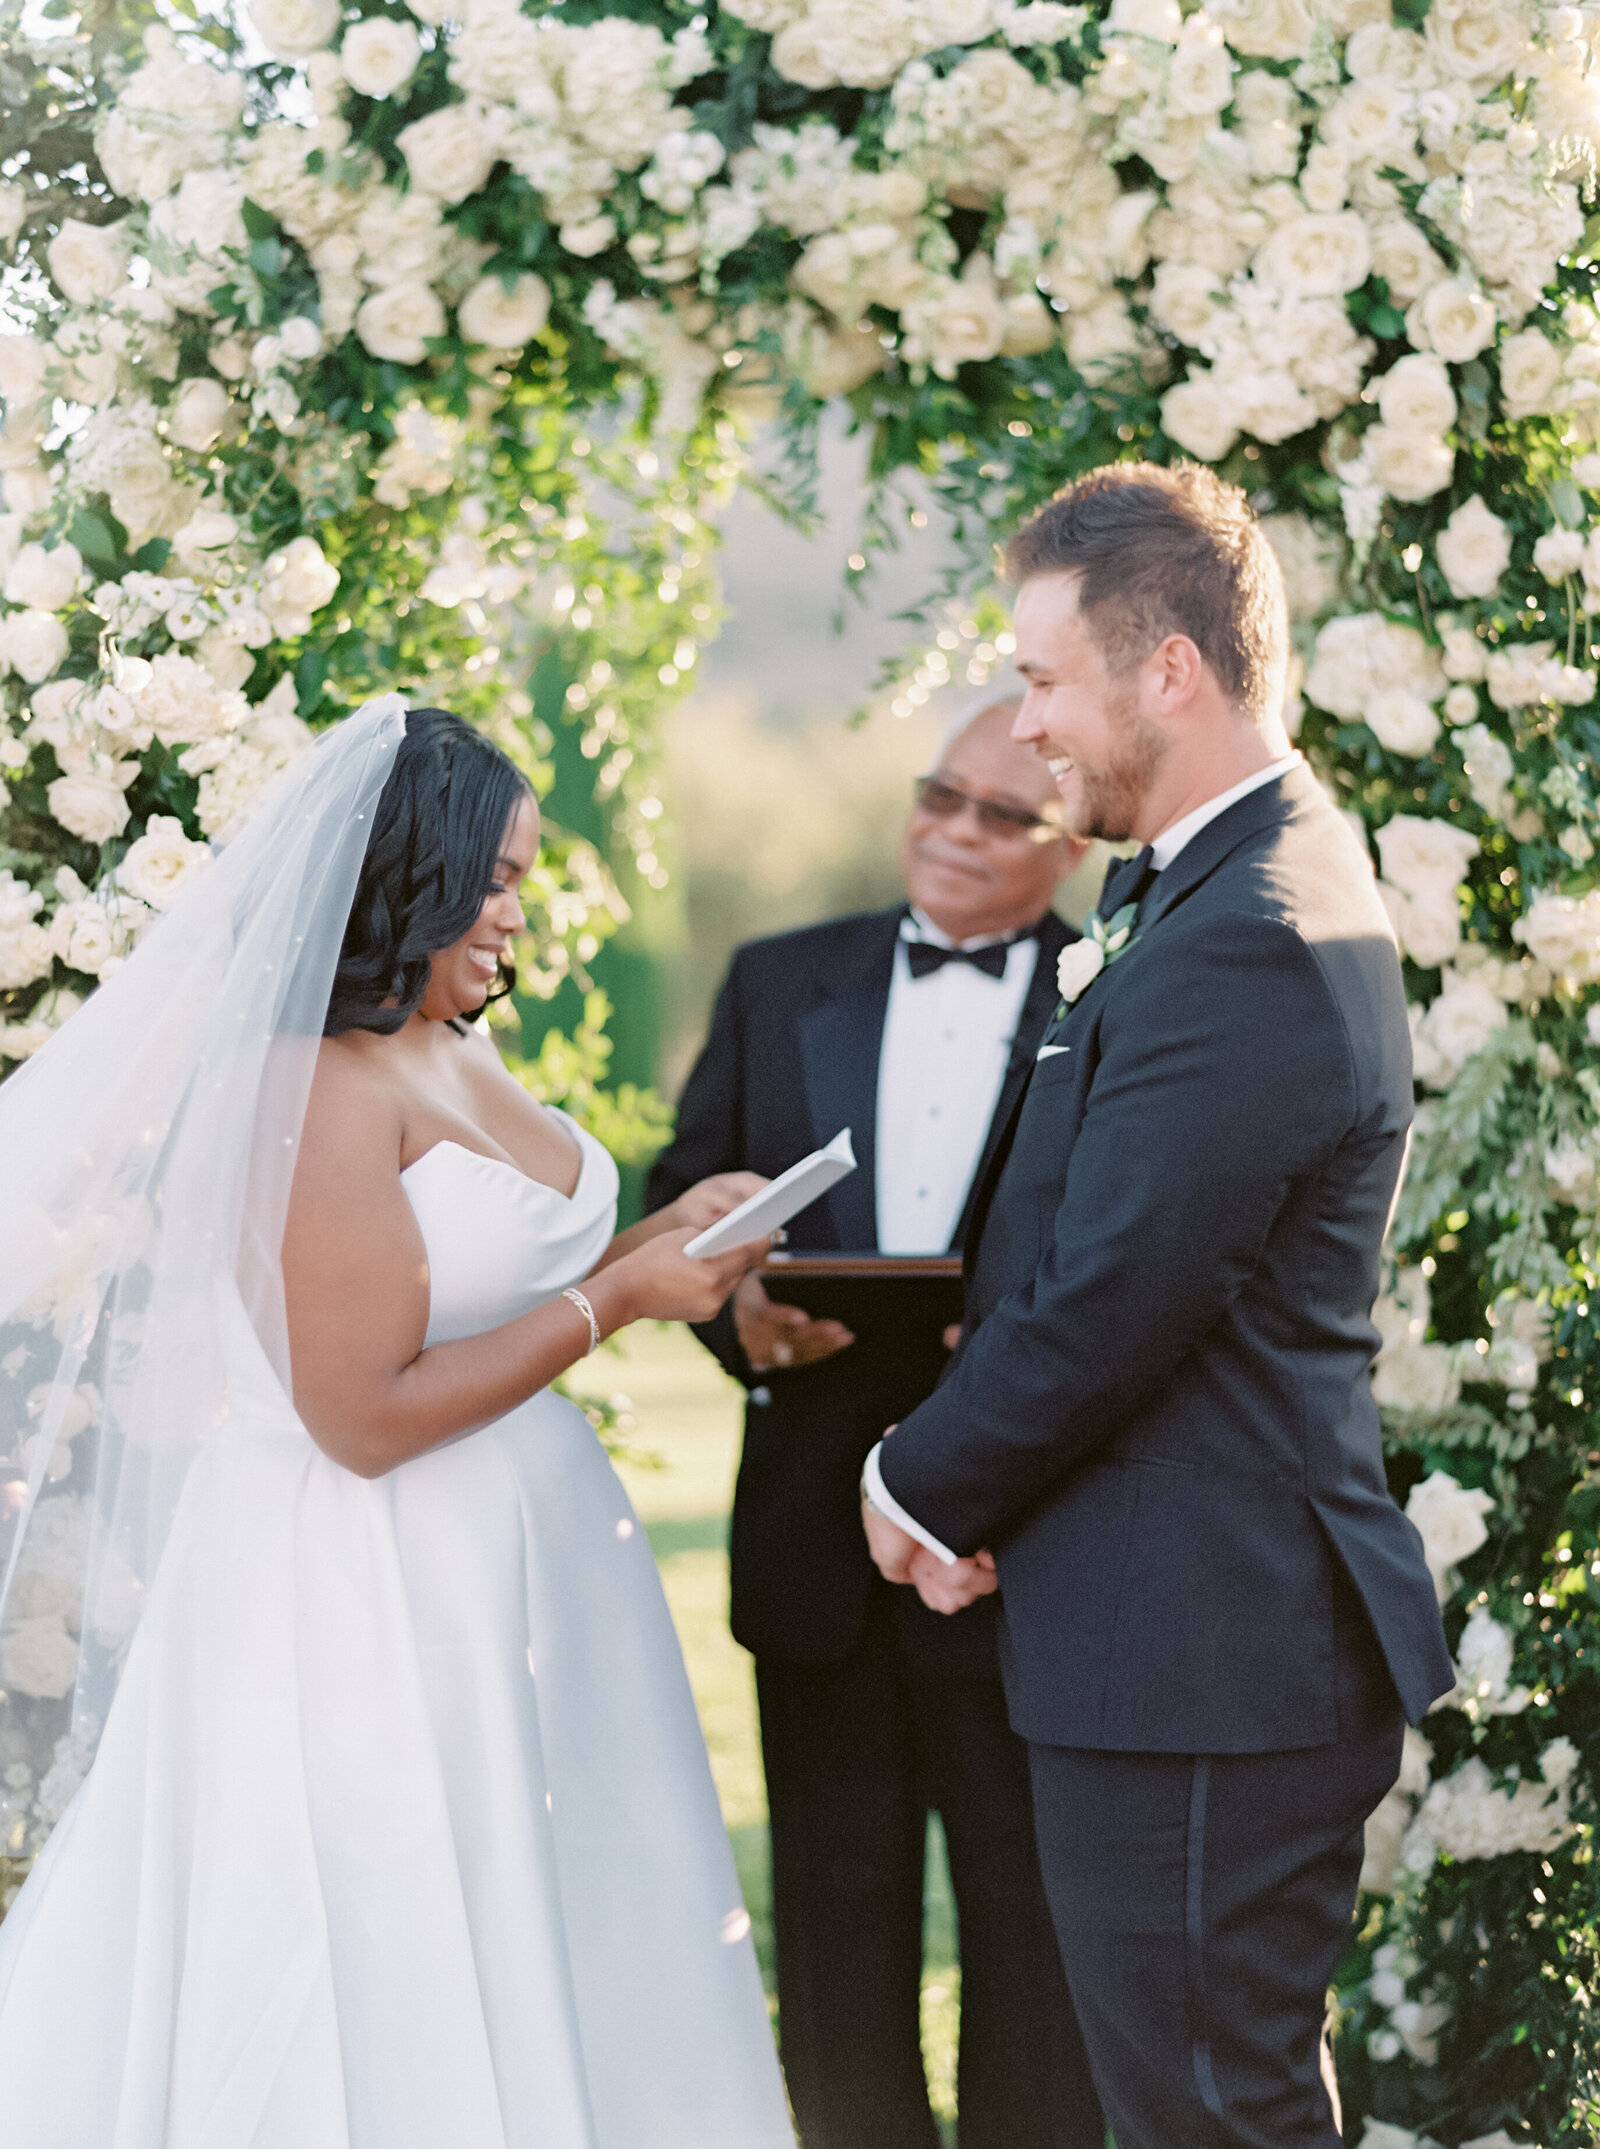 bride and groom exchanging vows under an arbor of white roses